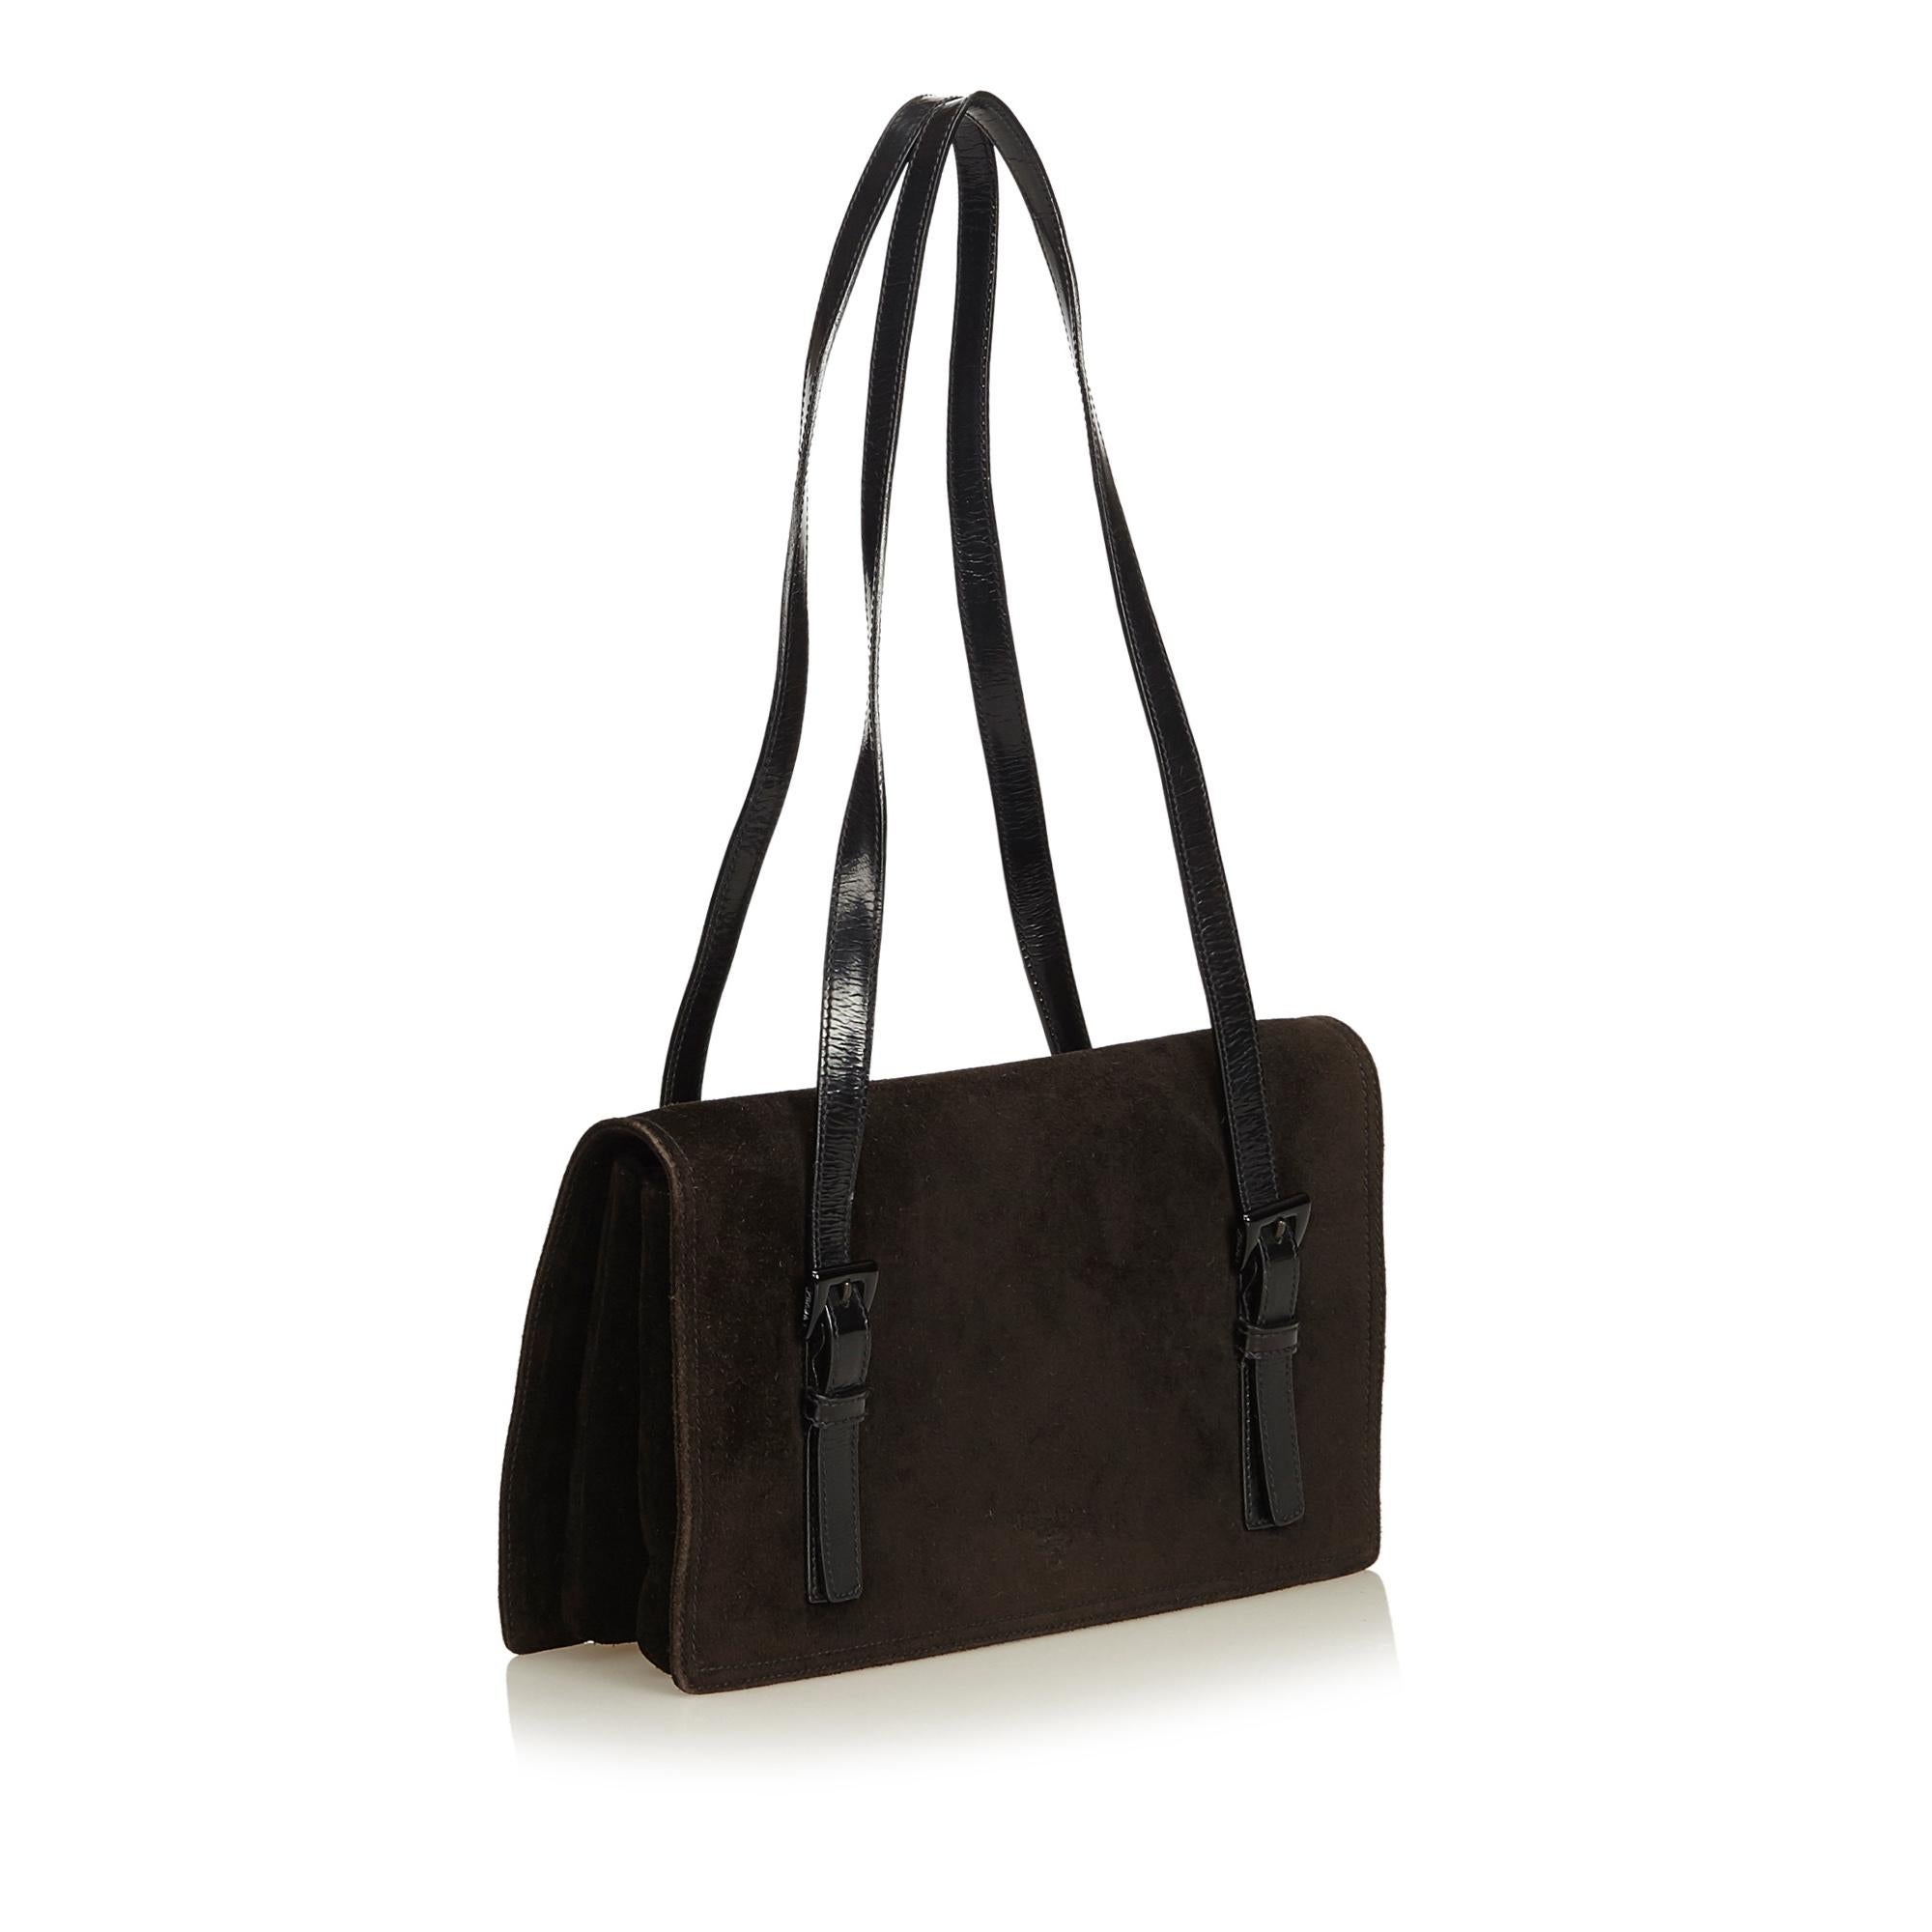 This shoulder bag features a nylon body, flat leather straps, front flap with magnetic closure, and an interior zip pocket. It carries as B+ condition rating.

Inclusions: 
Dust Bag

Dimensions:
Length: 17.00 cm
Width: 28.00 cm
Depth: 5.00